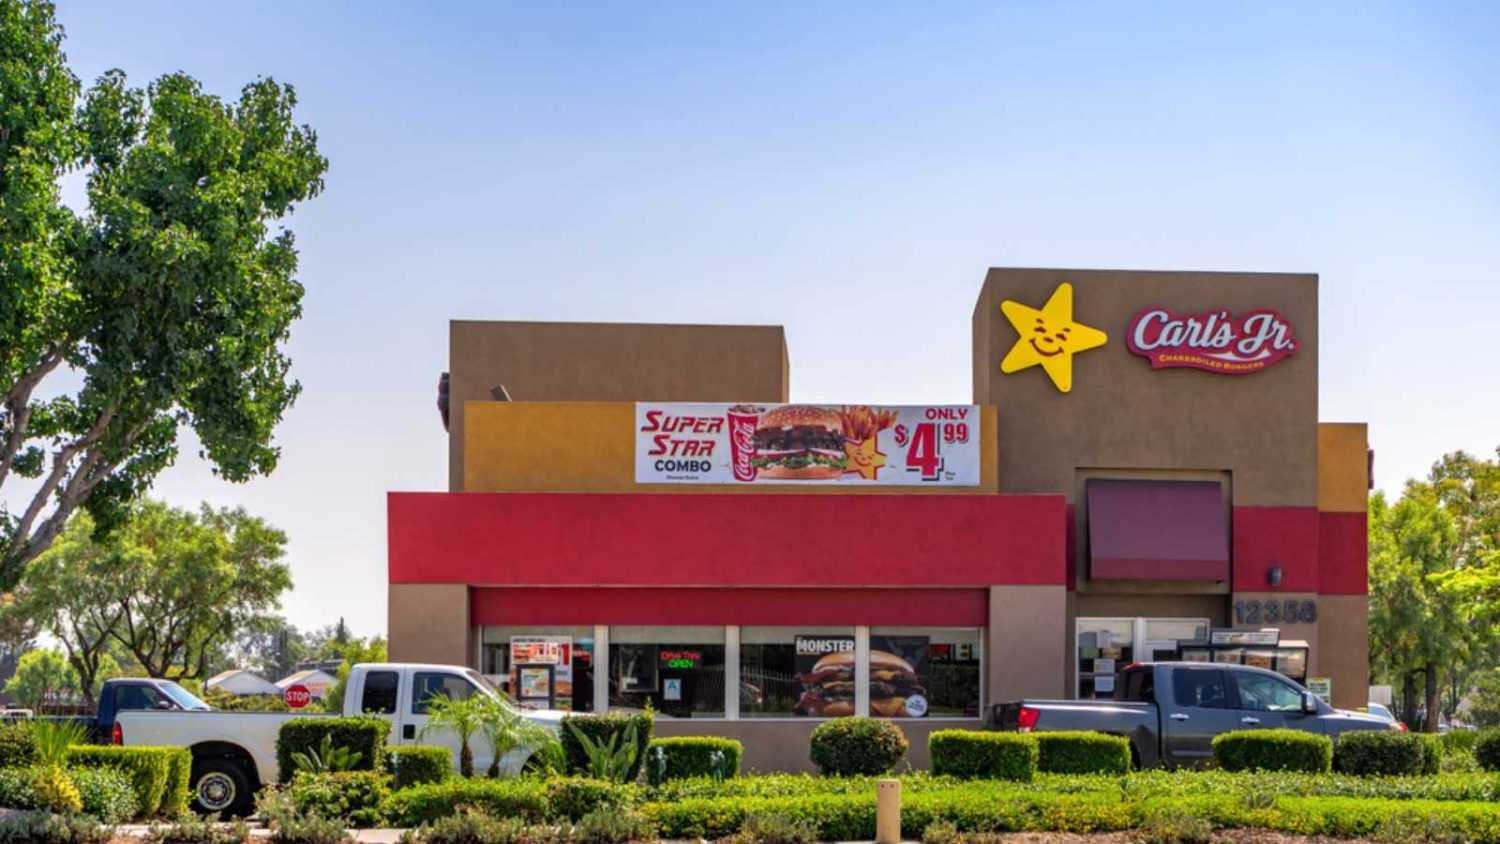 Whittier, CA / USA – September 3, 2020: Exterior view of a Carl’s Jr. restaurant with a drive thru on Washington Blvd. in the City of Whittier, California.